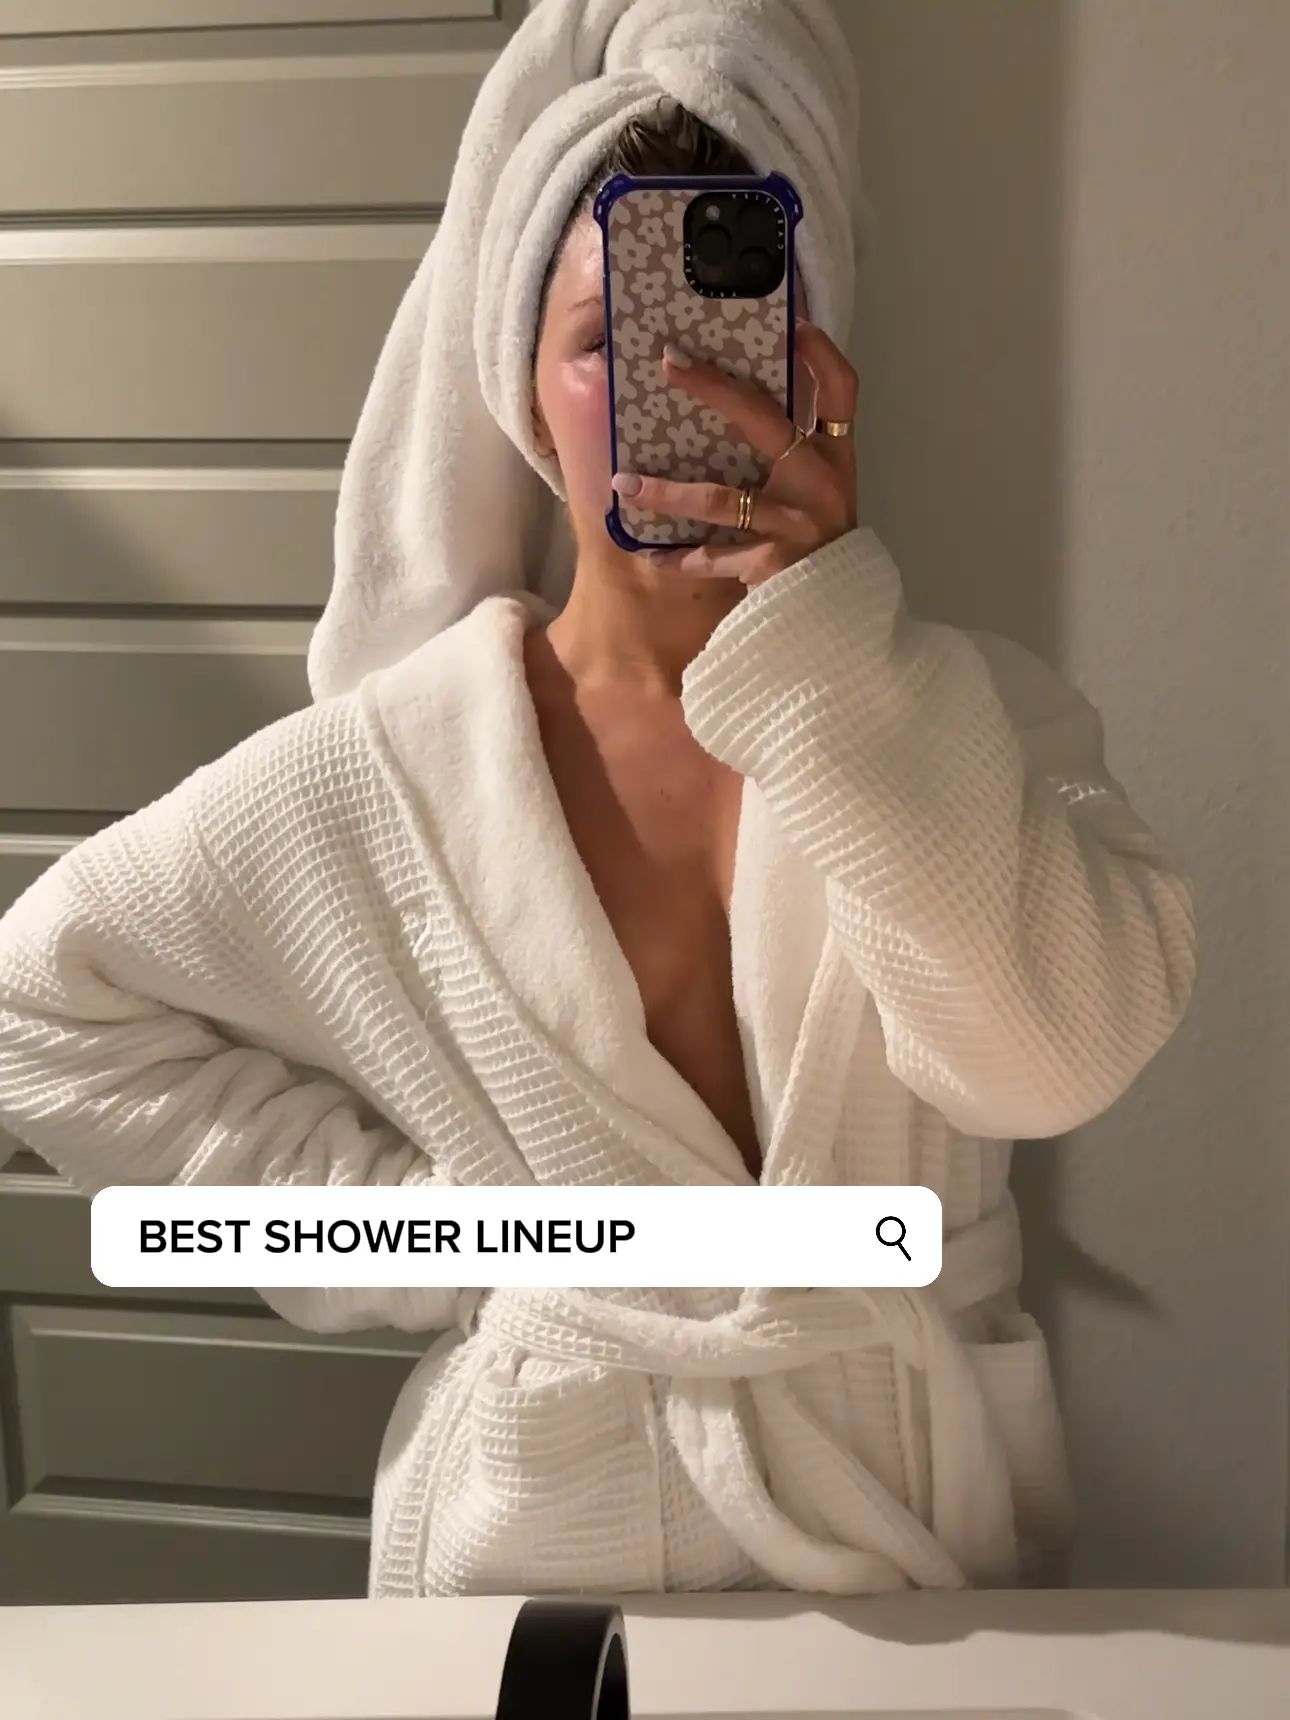 BEST SHOWER LINEUP, Gallery posted by Sydney Adams